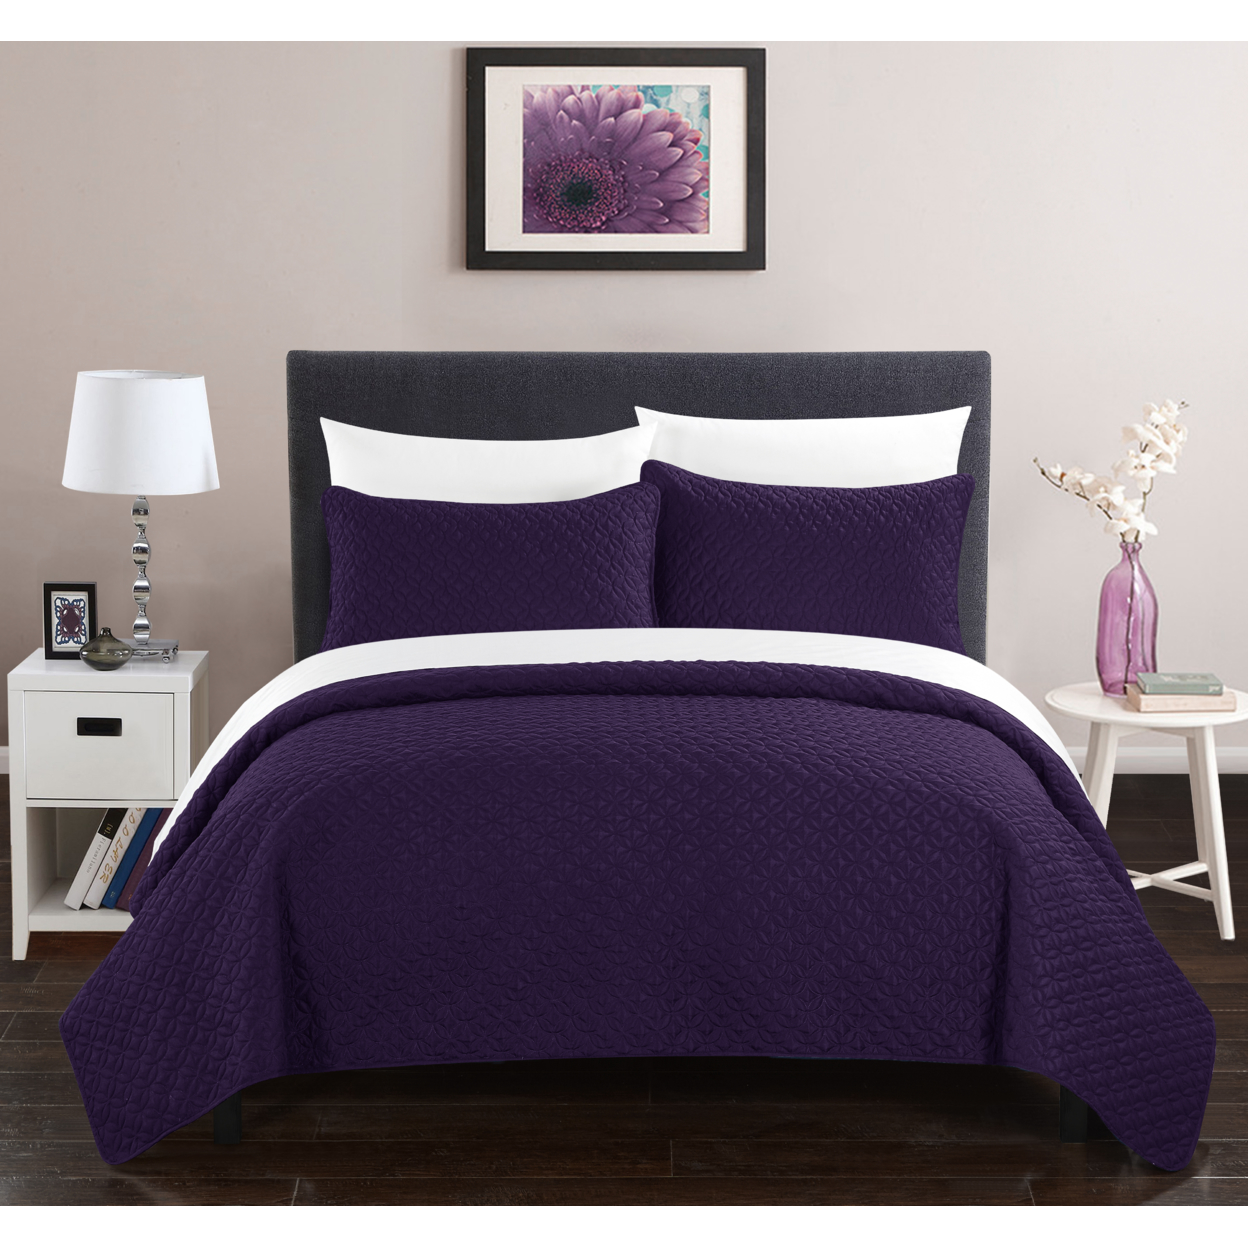 Gideon 3 Or 2 Piece Quilt Cover Set Rose Star Geometric Quilted Bedding - Purple, Twin